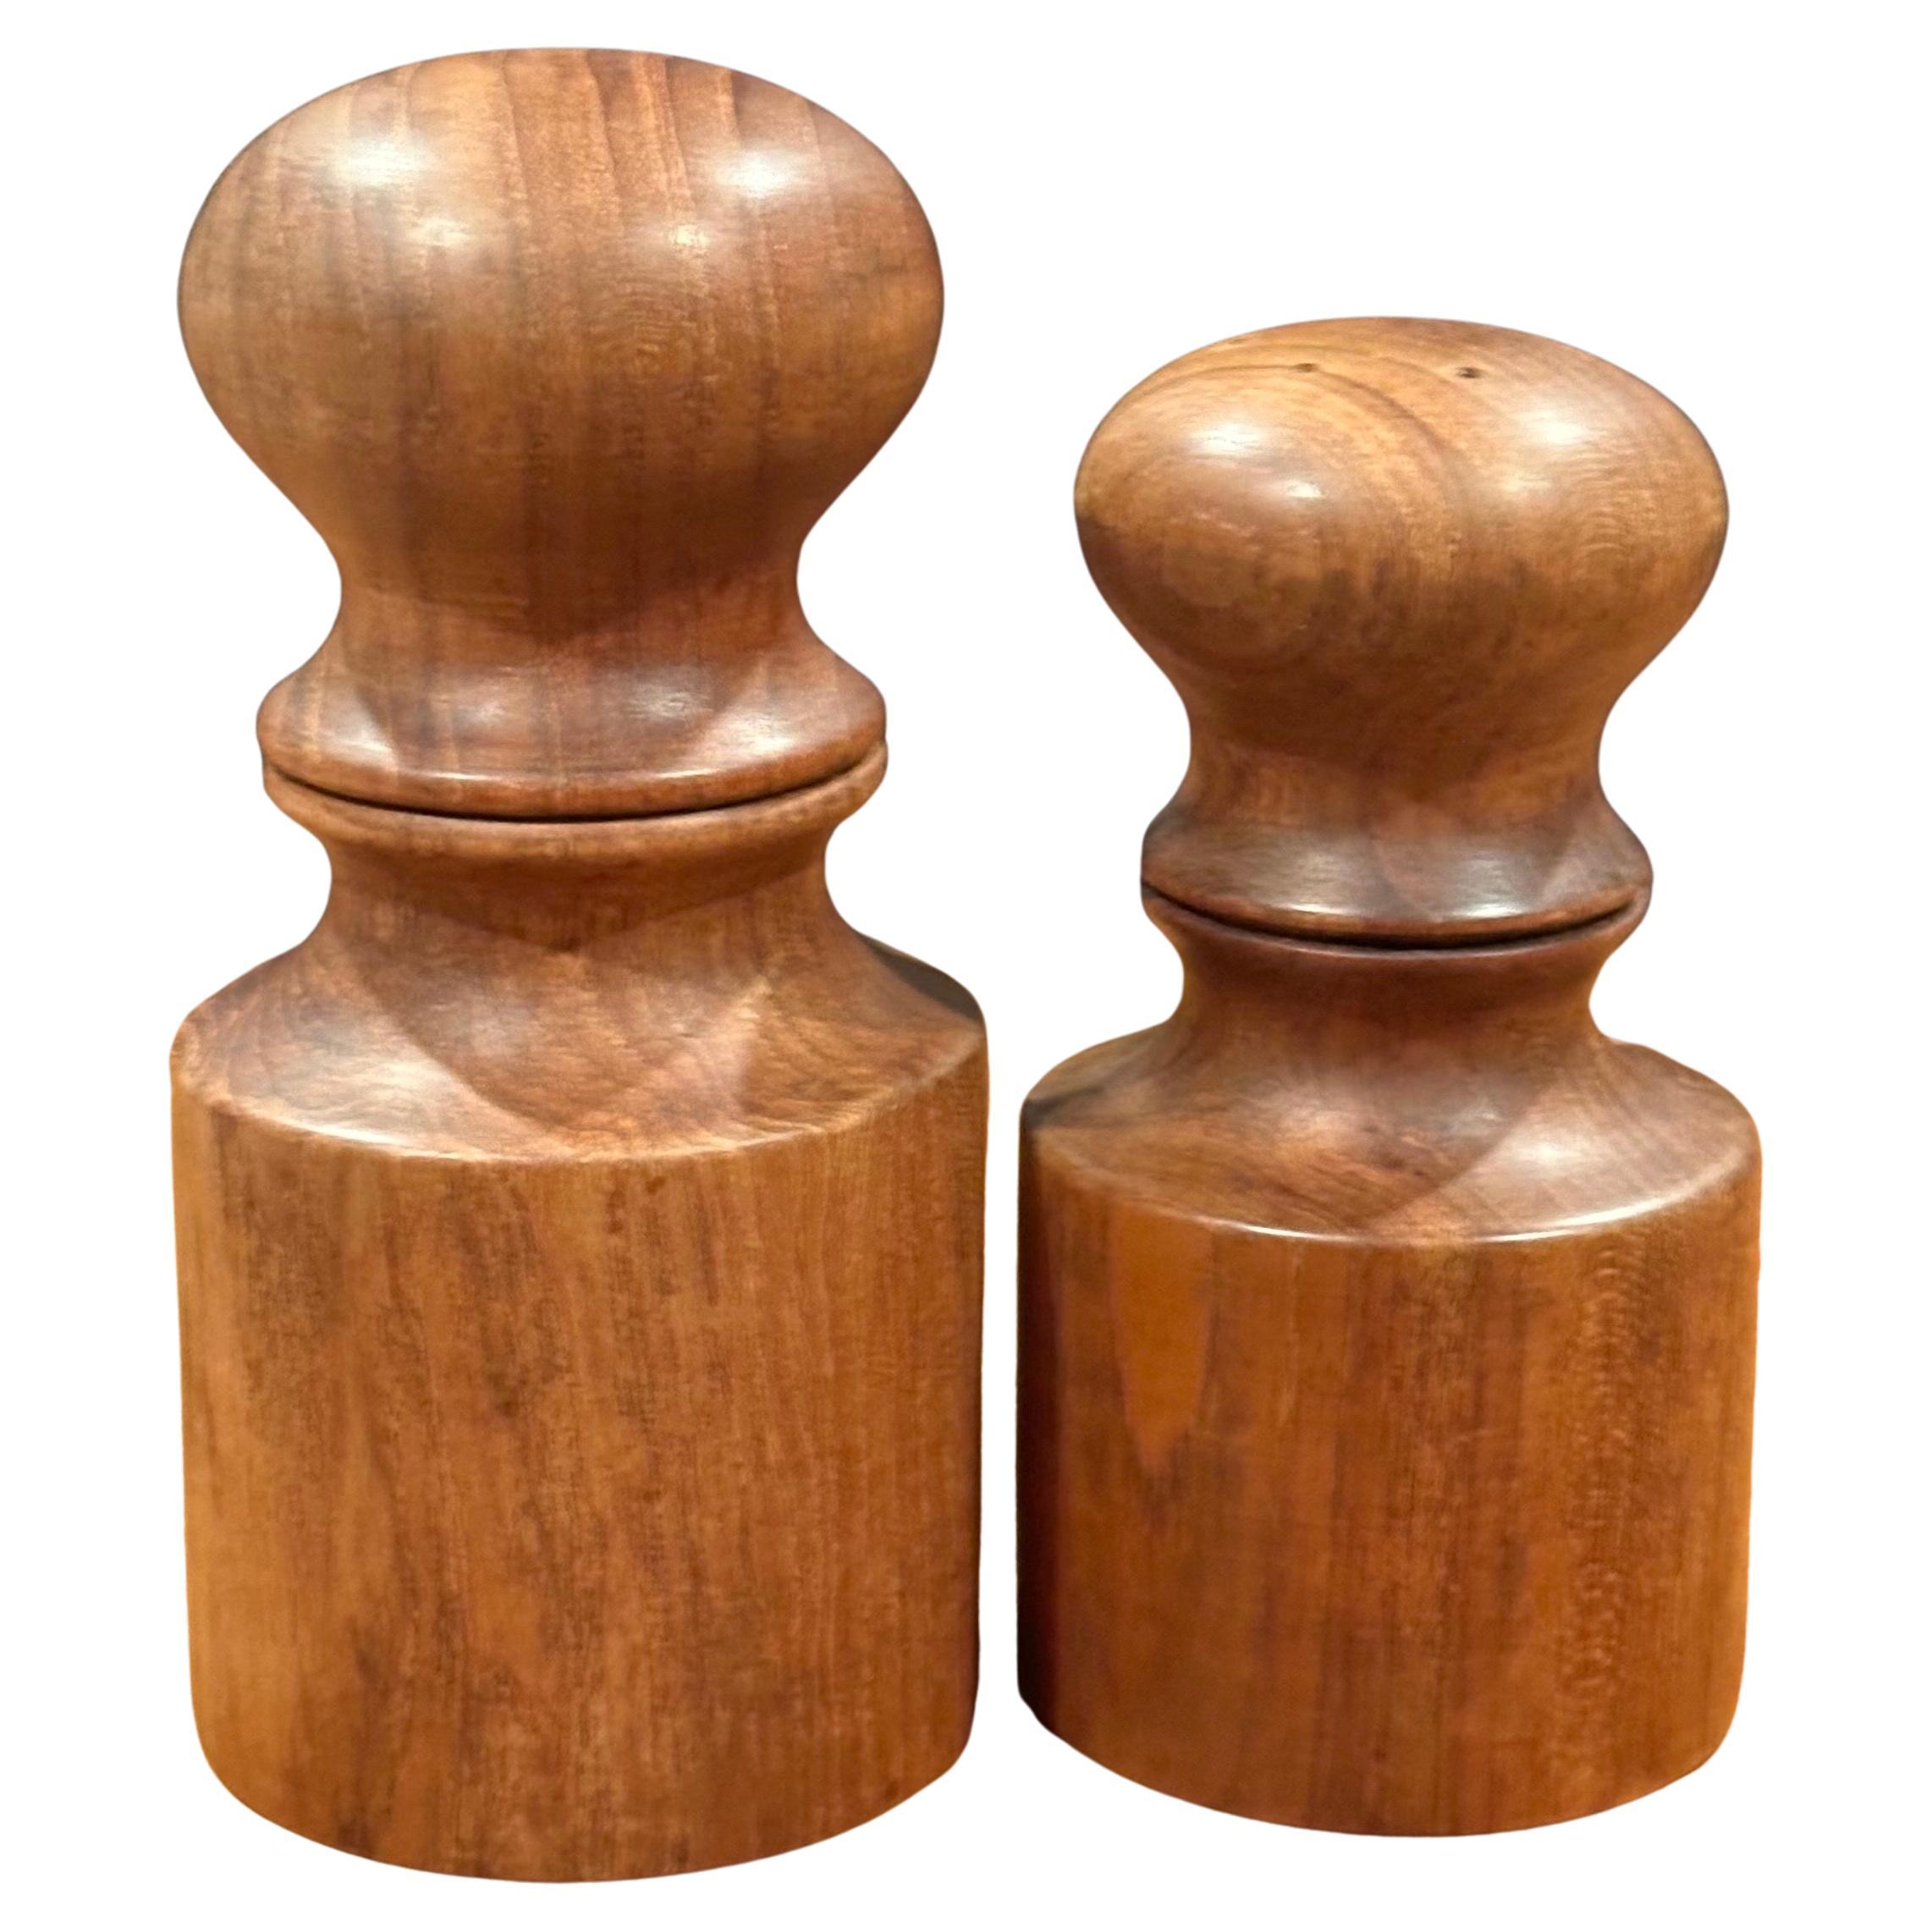 Pair of MCM teak salt and pepper shakers by Jens Quistgaard for Dansk, circa 1970s.  The set are in very good vintage condition and measure as follows:   

Salt         2.5